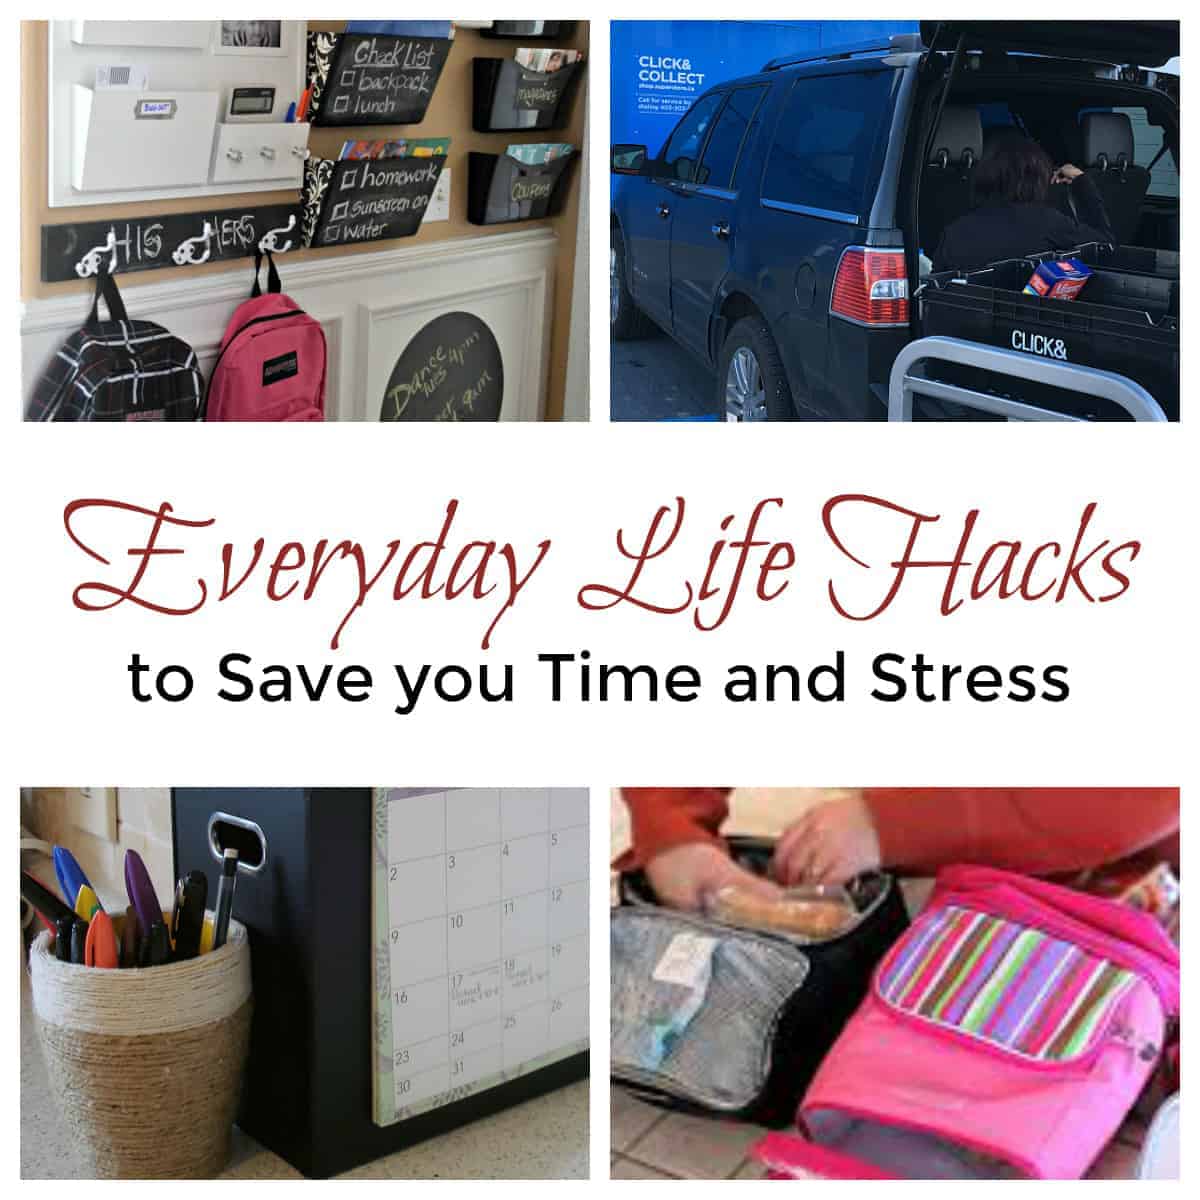 Everyday Life Hacks to Save you Time and Stress